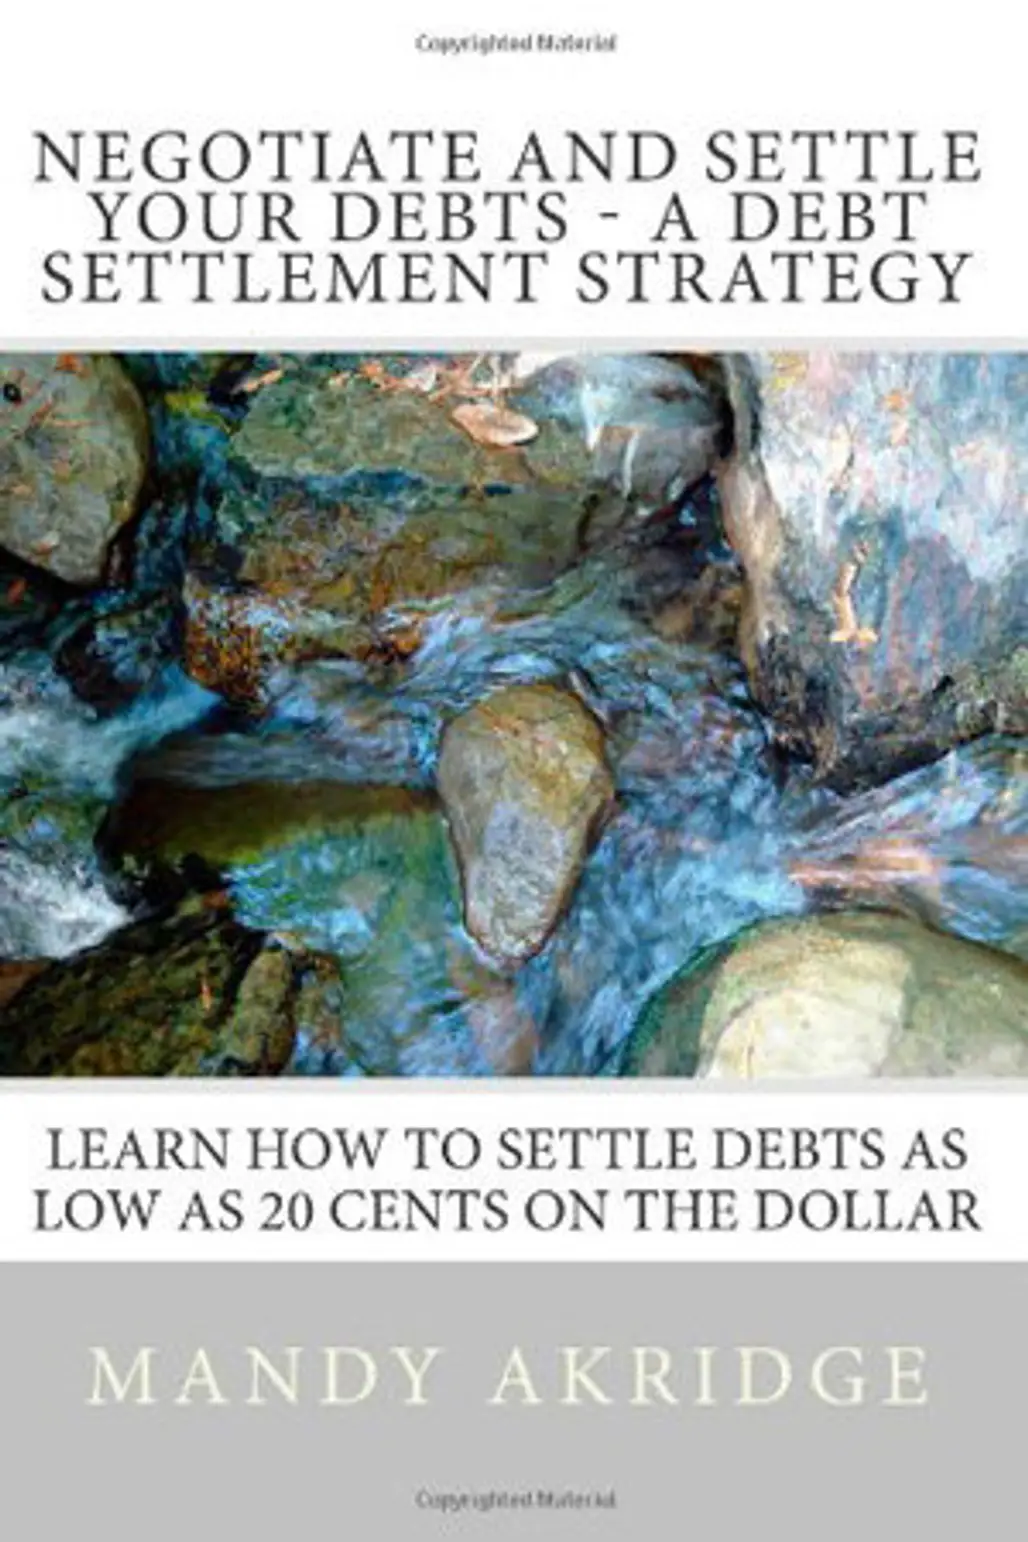 Negotiate and Settle Your Debts: a Debt Settlement Strategy by Mandy Ackridge